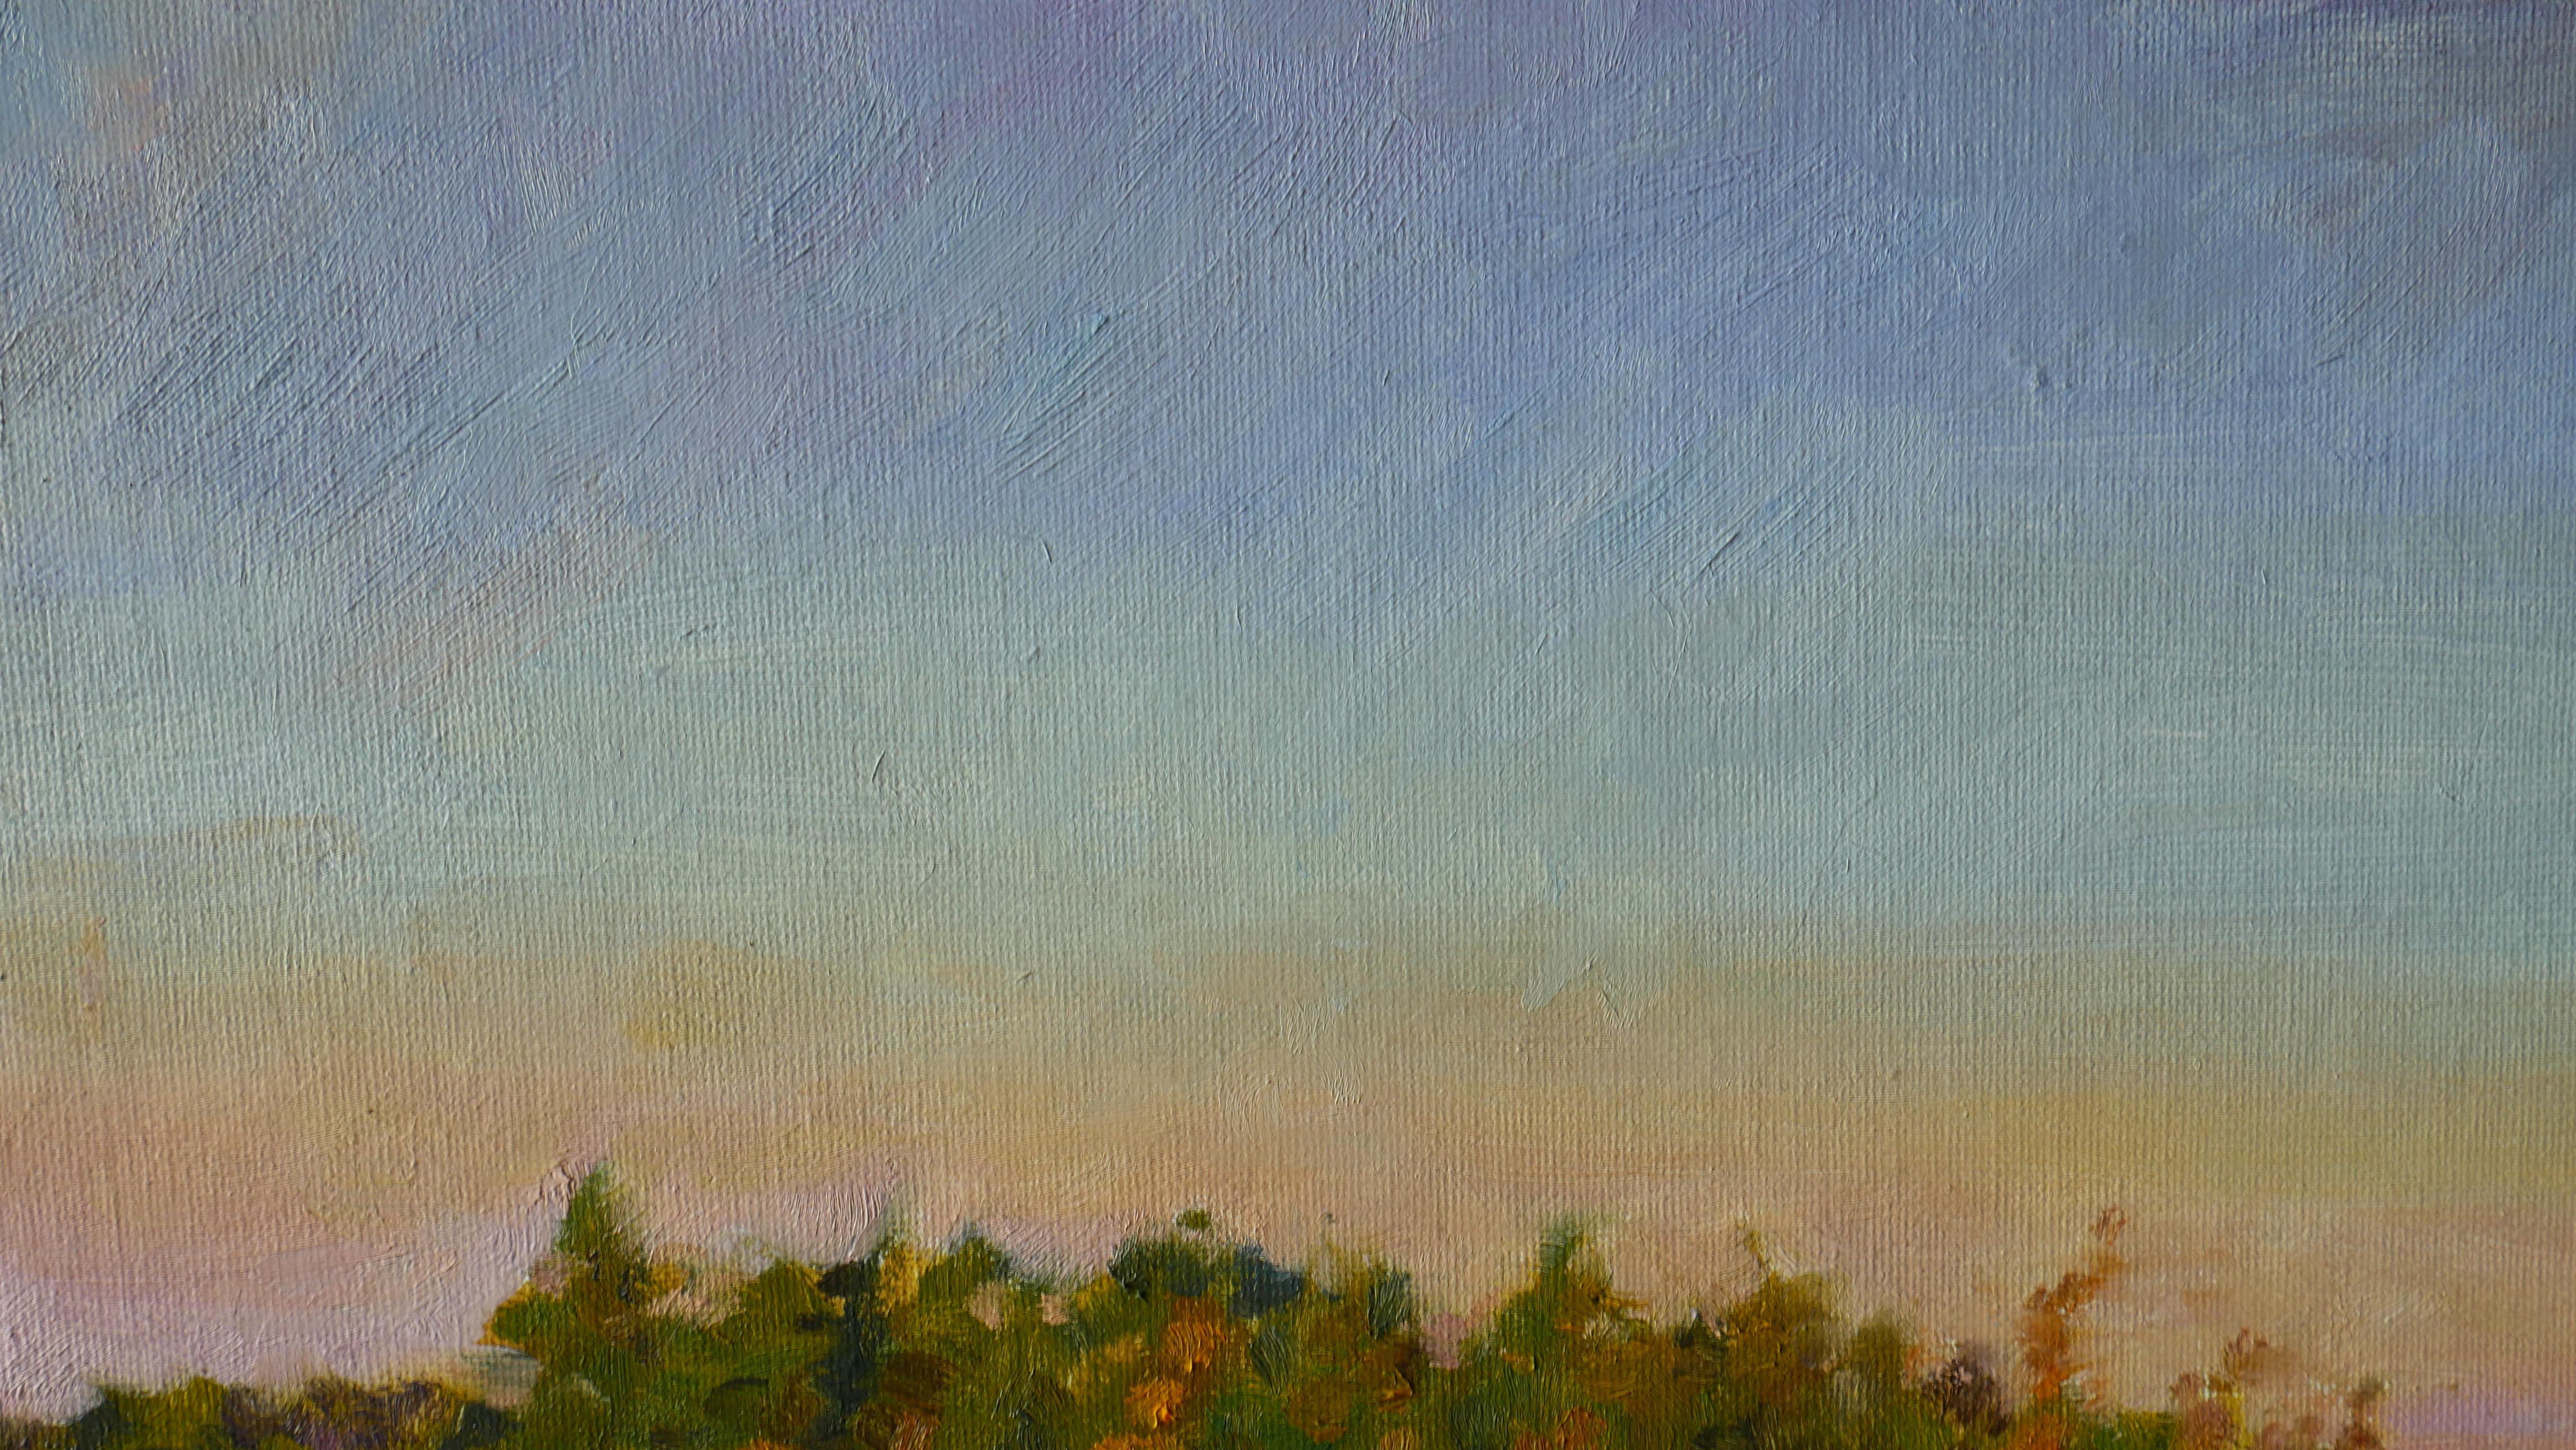 The autumn evening painting with sunset was painted en plein air, the artist was admired by bright colors of sunset and purple shadows of trees.

The picture is author's and original.
Materials used: oil on canvas board.
Dimensions: 11,81x15,75